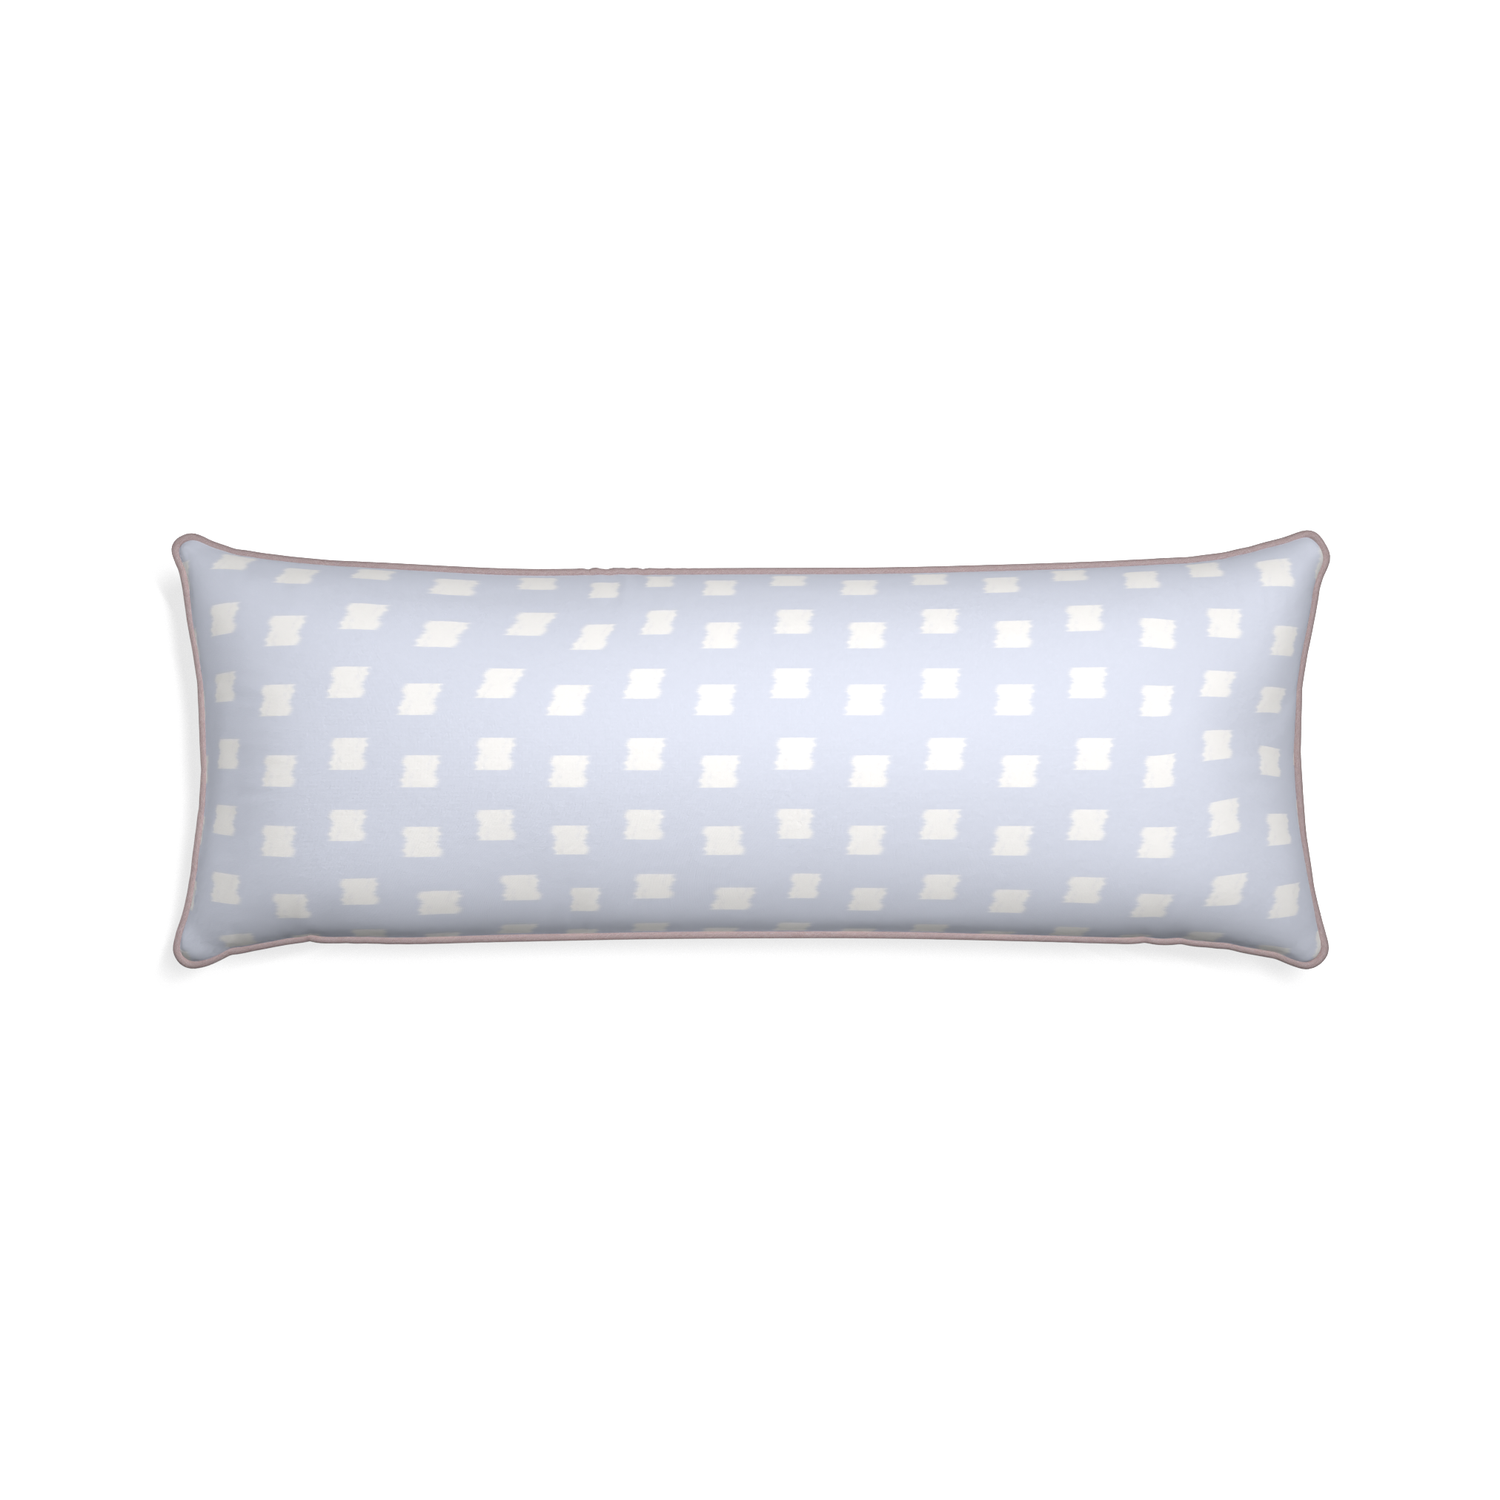 Xl-lumbar denton custom sky blue patternpillow with orchid piping on white background